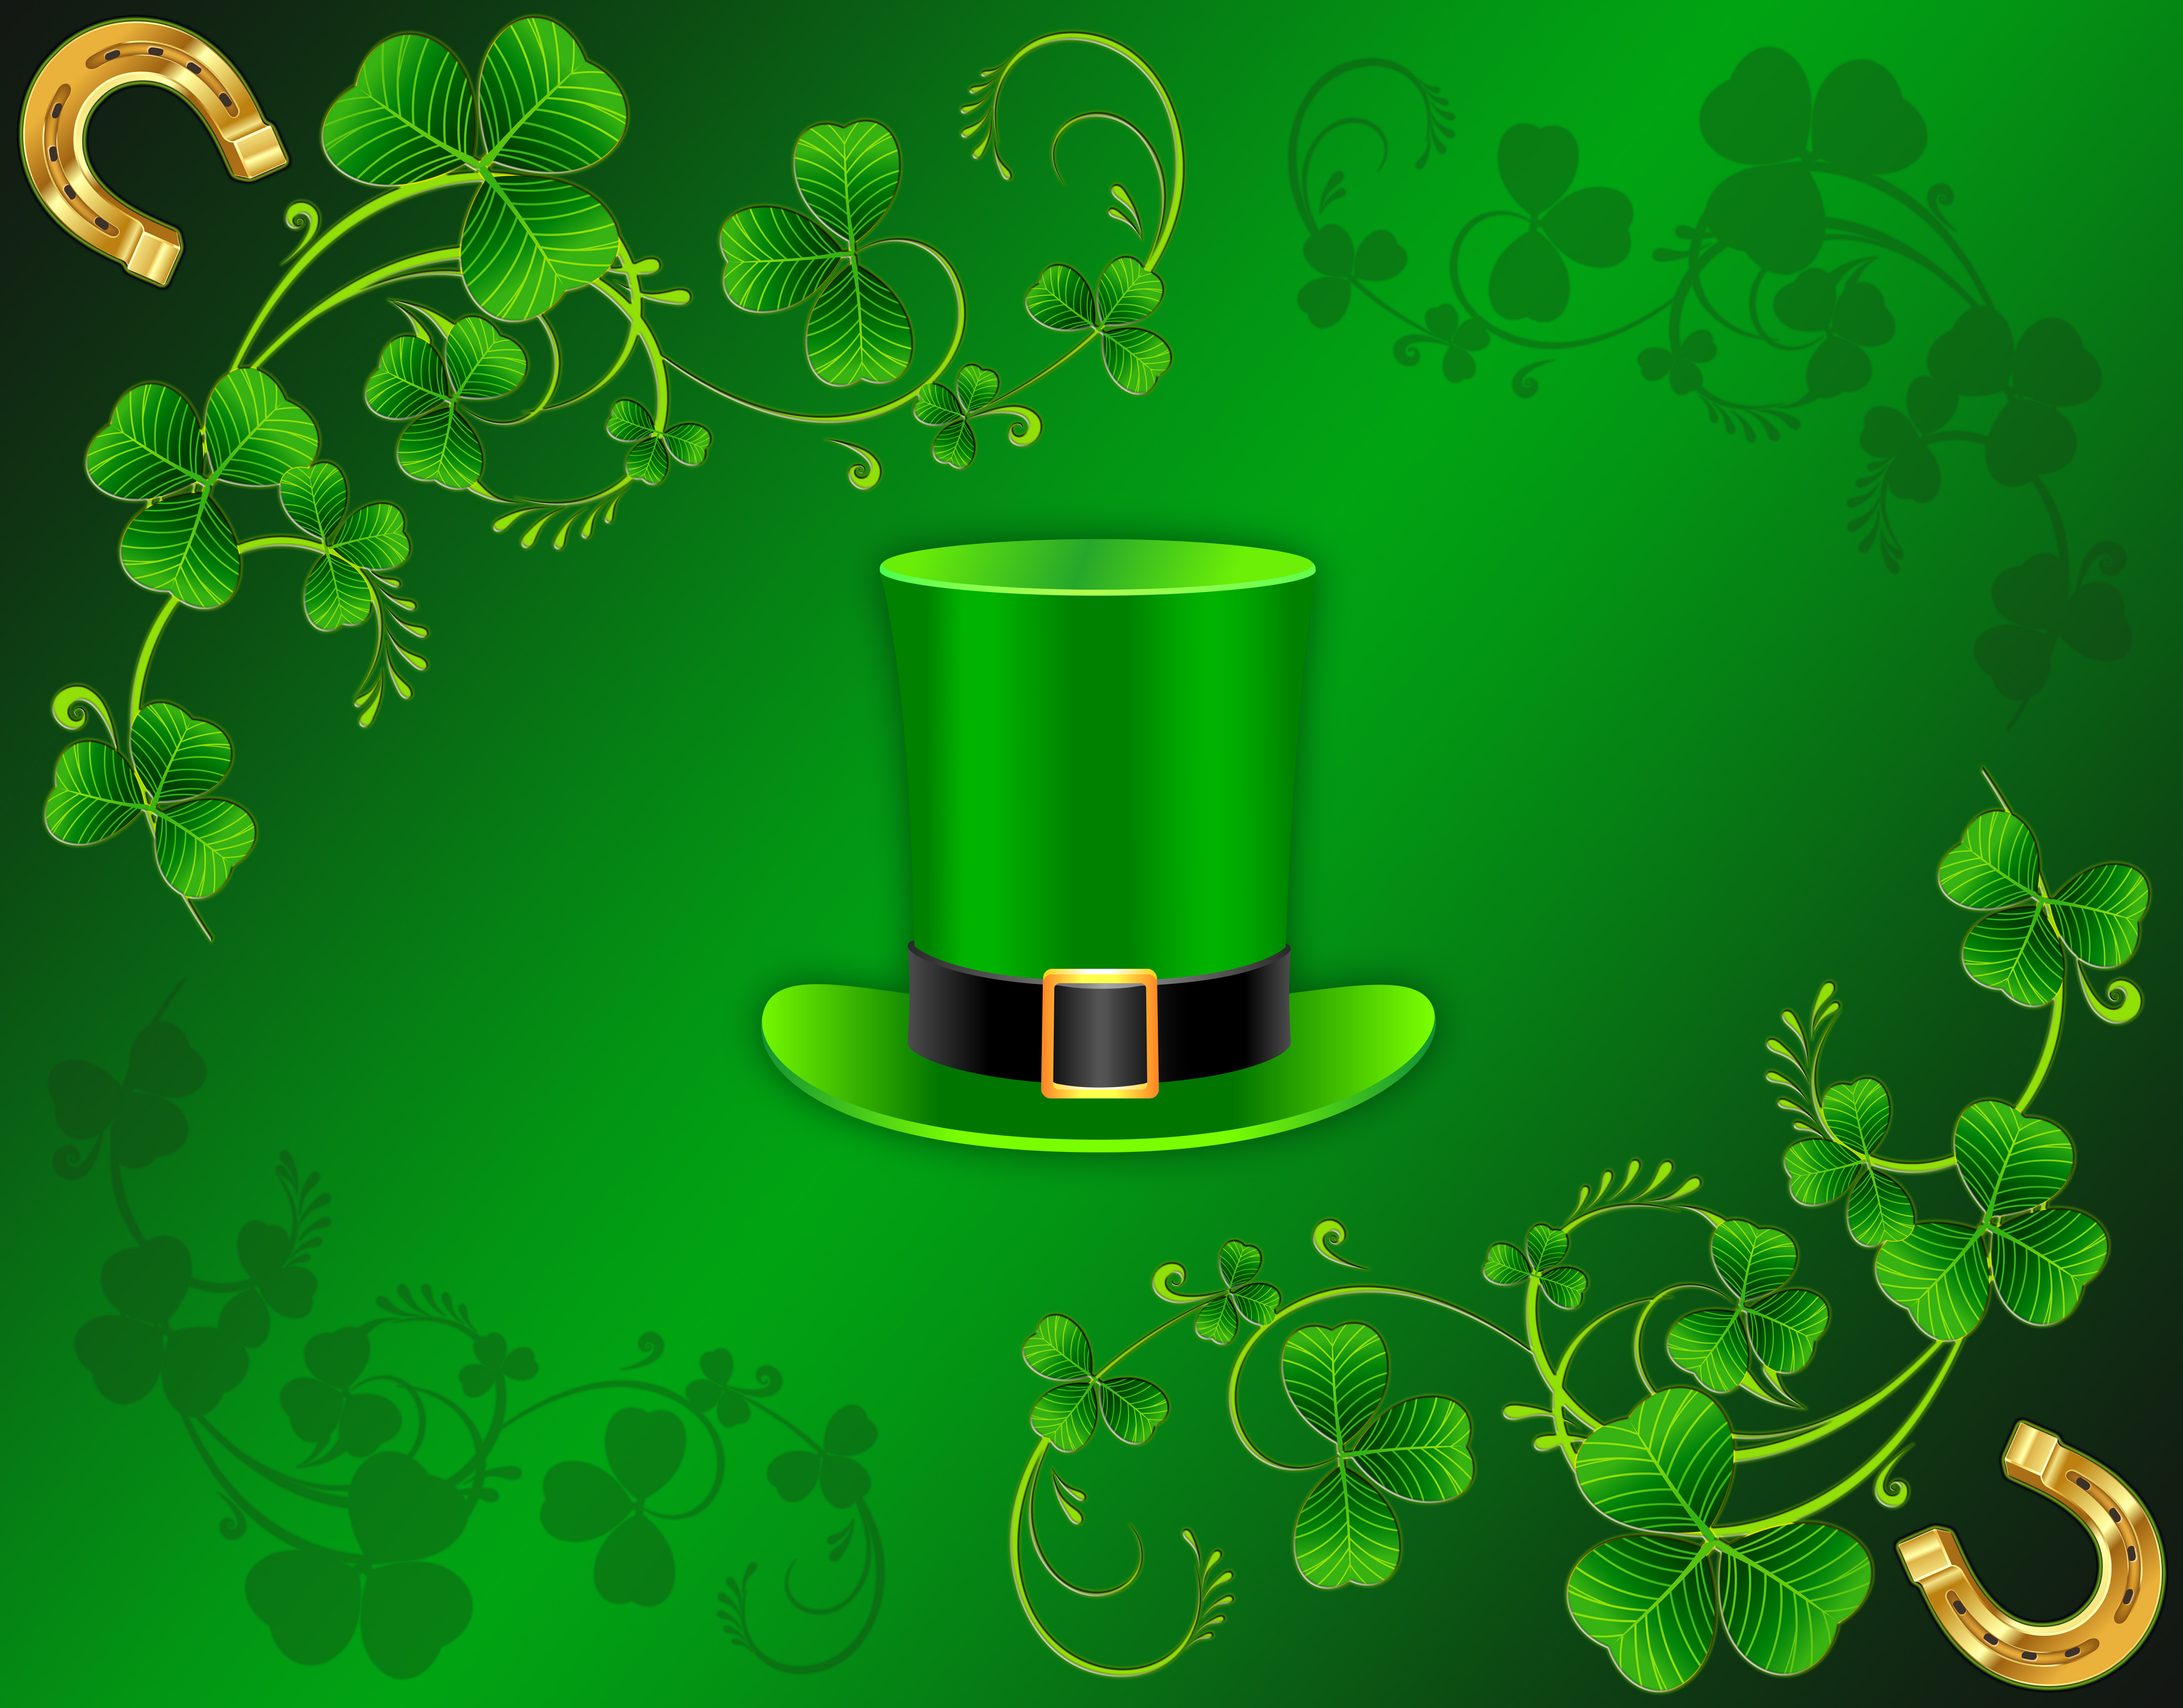 green, st patrick's day, holiday, clover, hat